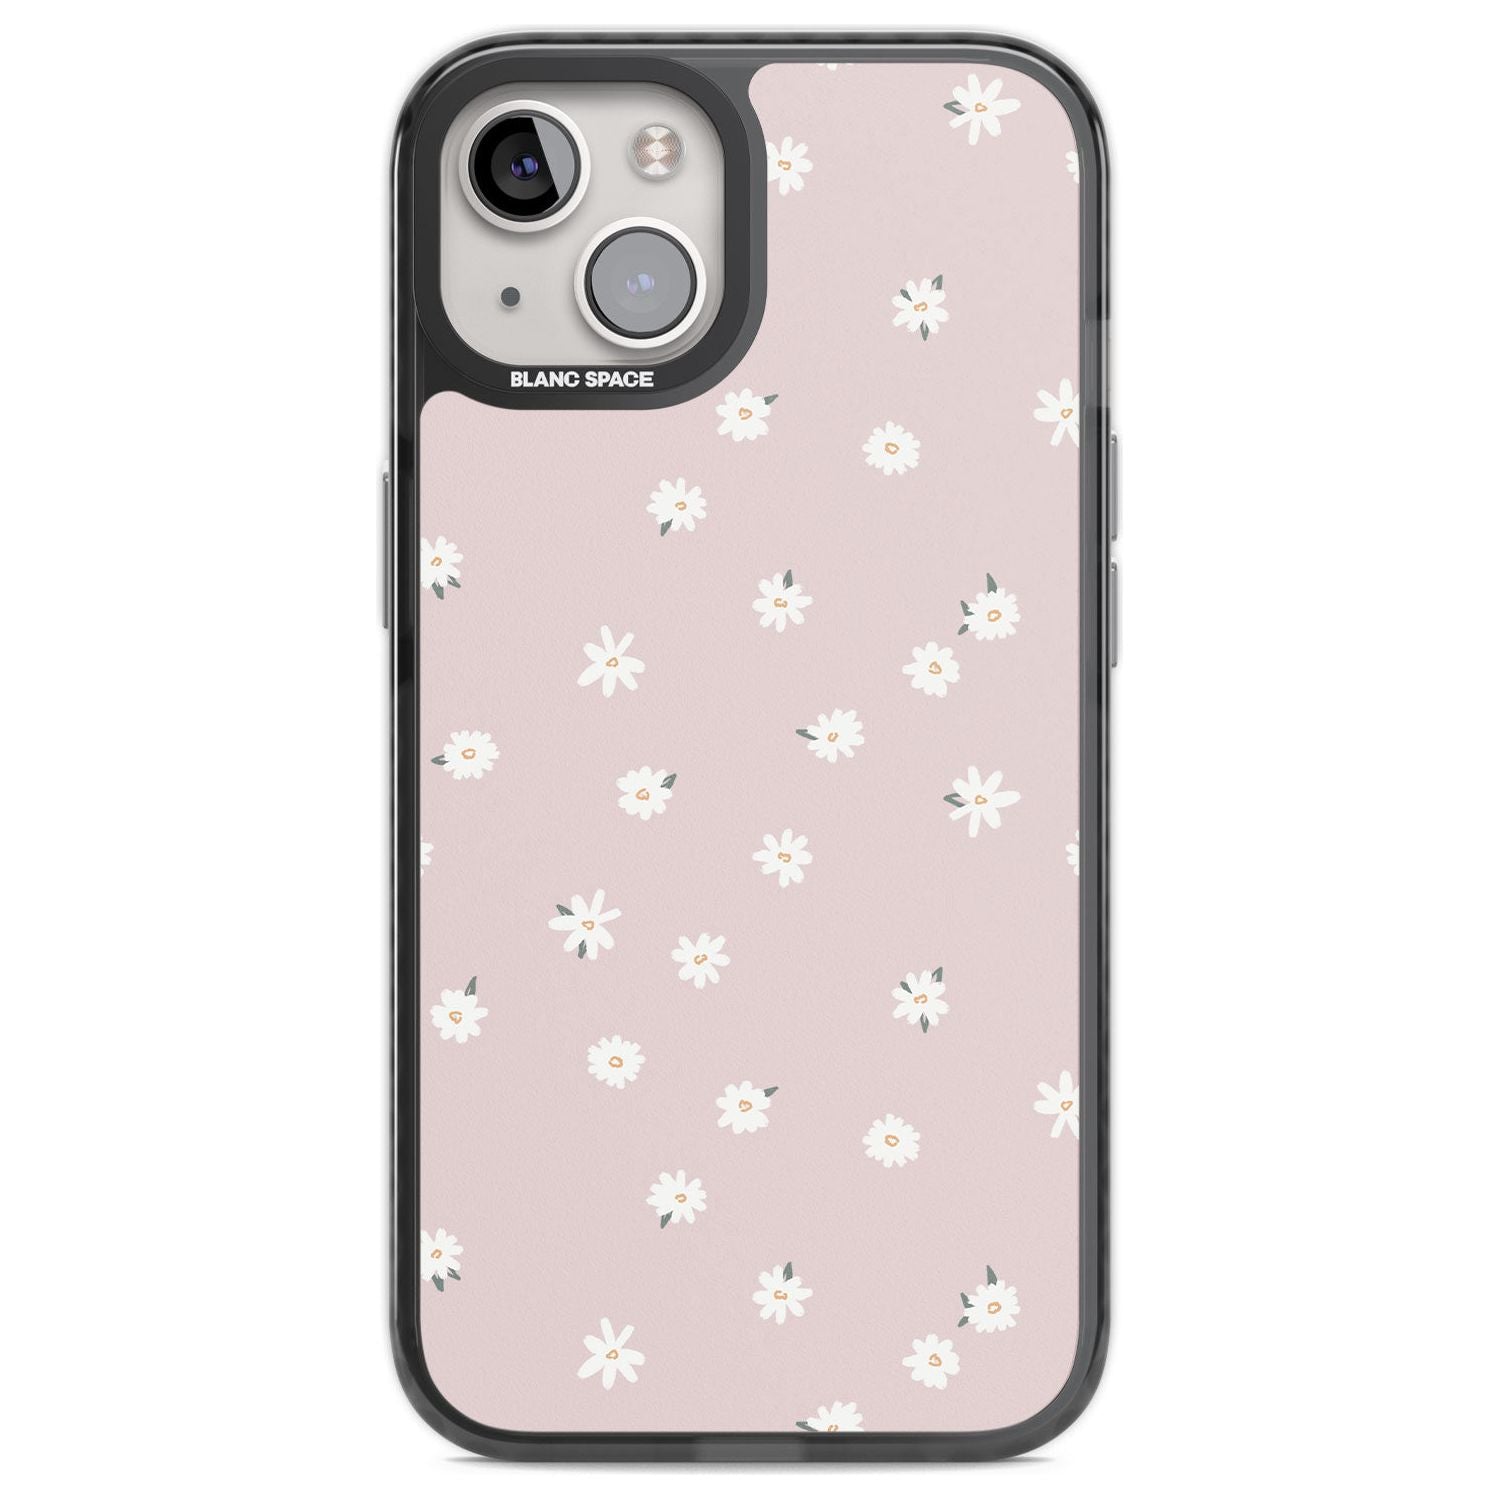 Painted Daises on Pink Phone Case iPhone 12 / Black Impact Case,iPhone 13 / Black Impact Case,iPhone 12 Pro / Black Impact Case,iPhone 14 / Black Impact Case,iPhone 15 Plus / Black Impact Case,iPhone 15 / Black Impact Case Blanc Space